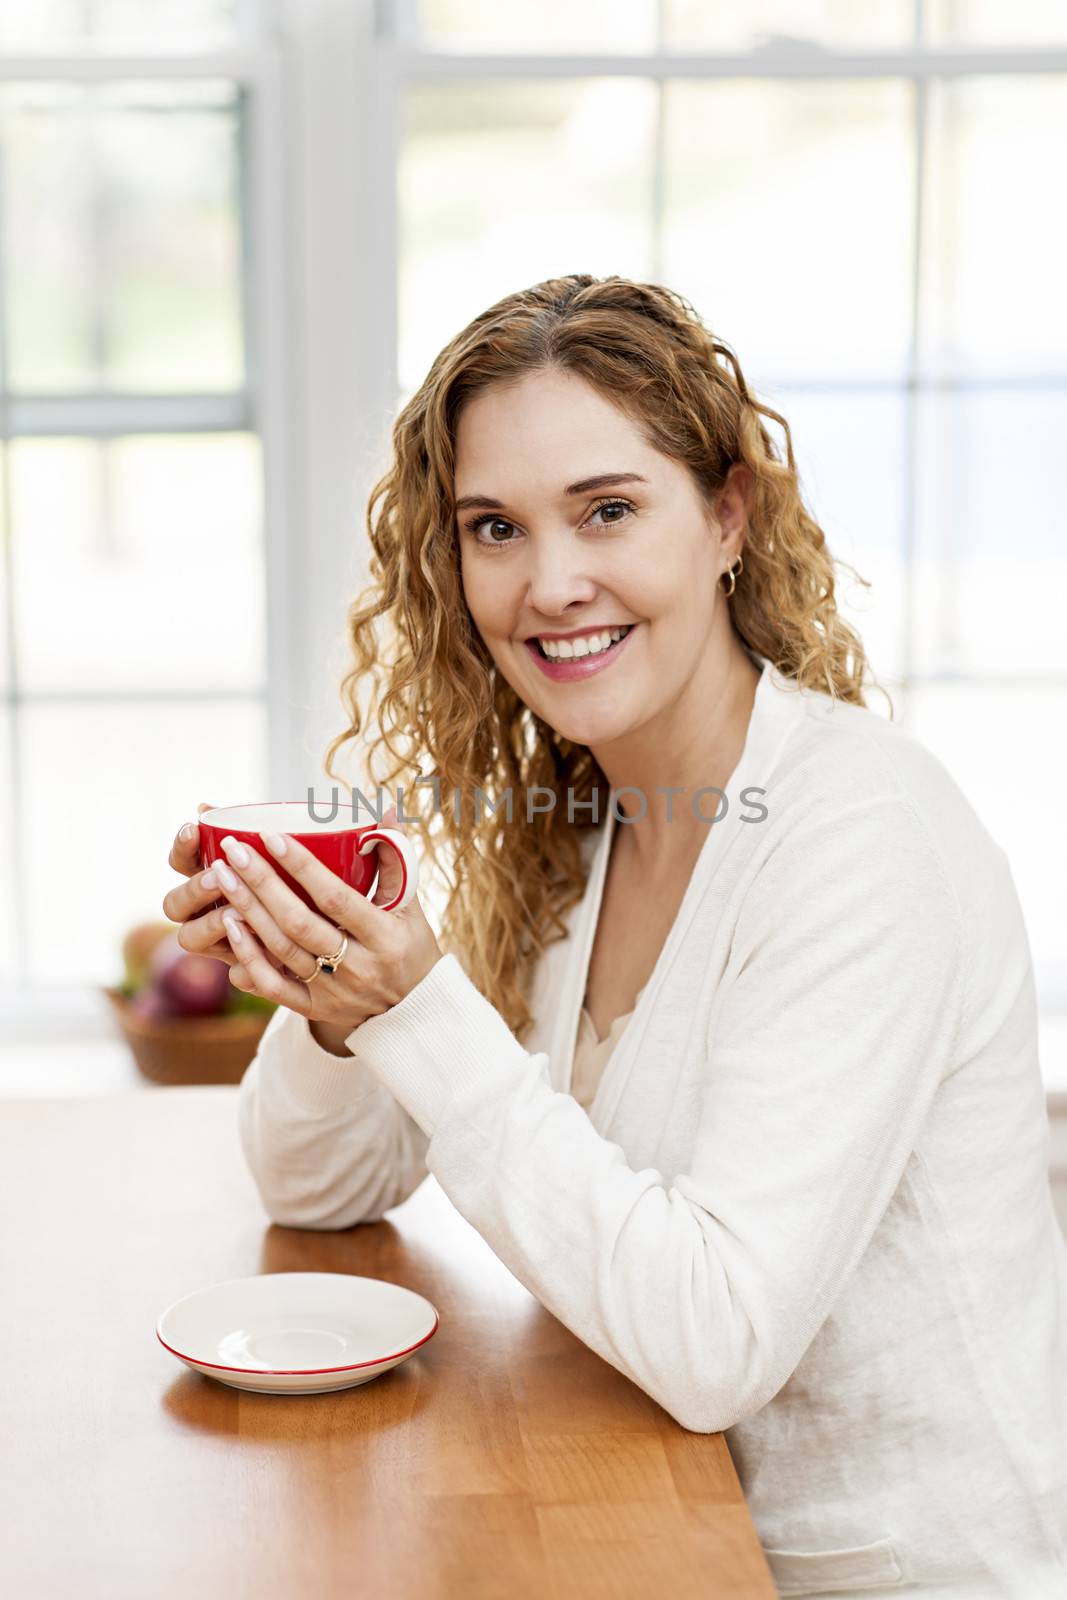 Portrait of smiling woman holding red coffee cup sitting at table in home kitchen by window